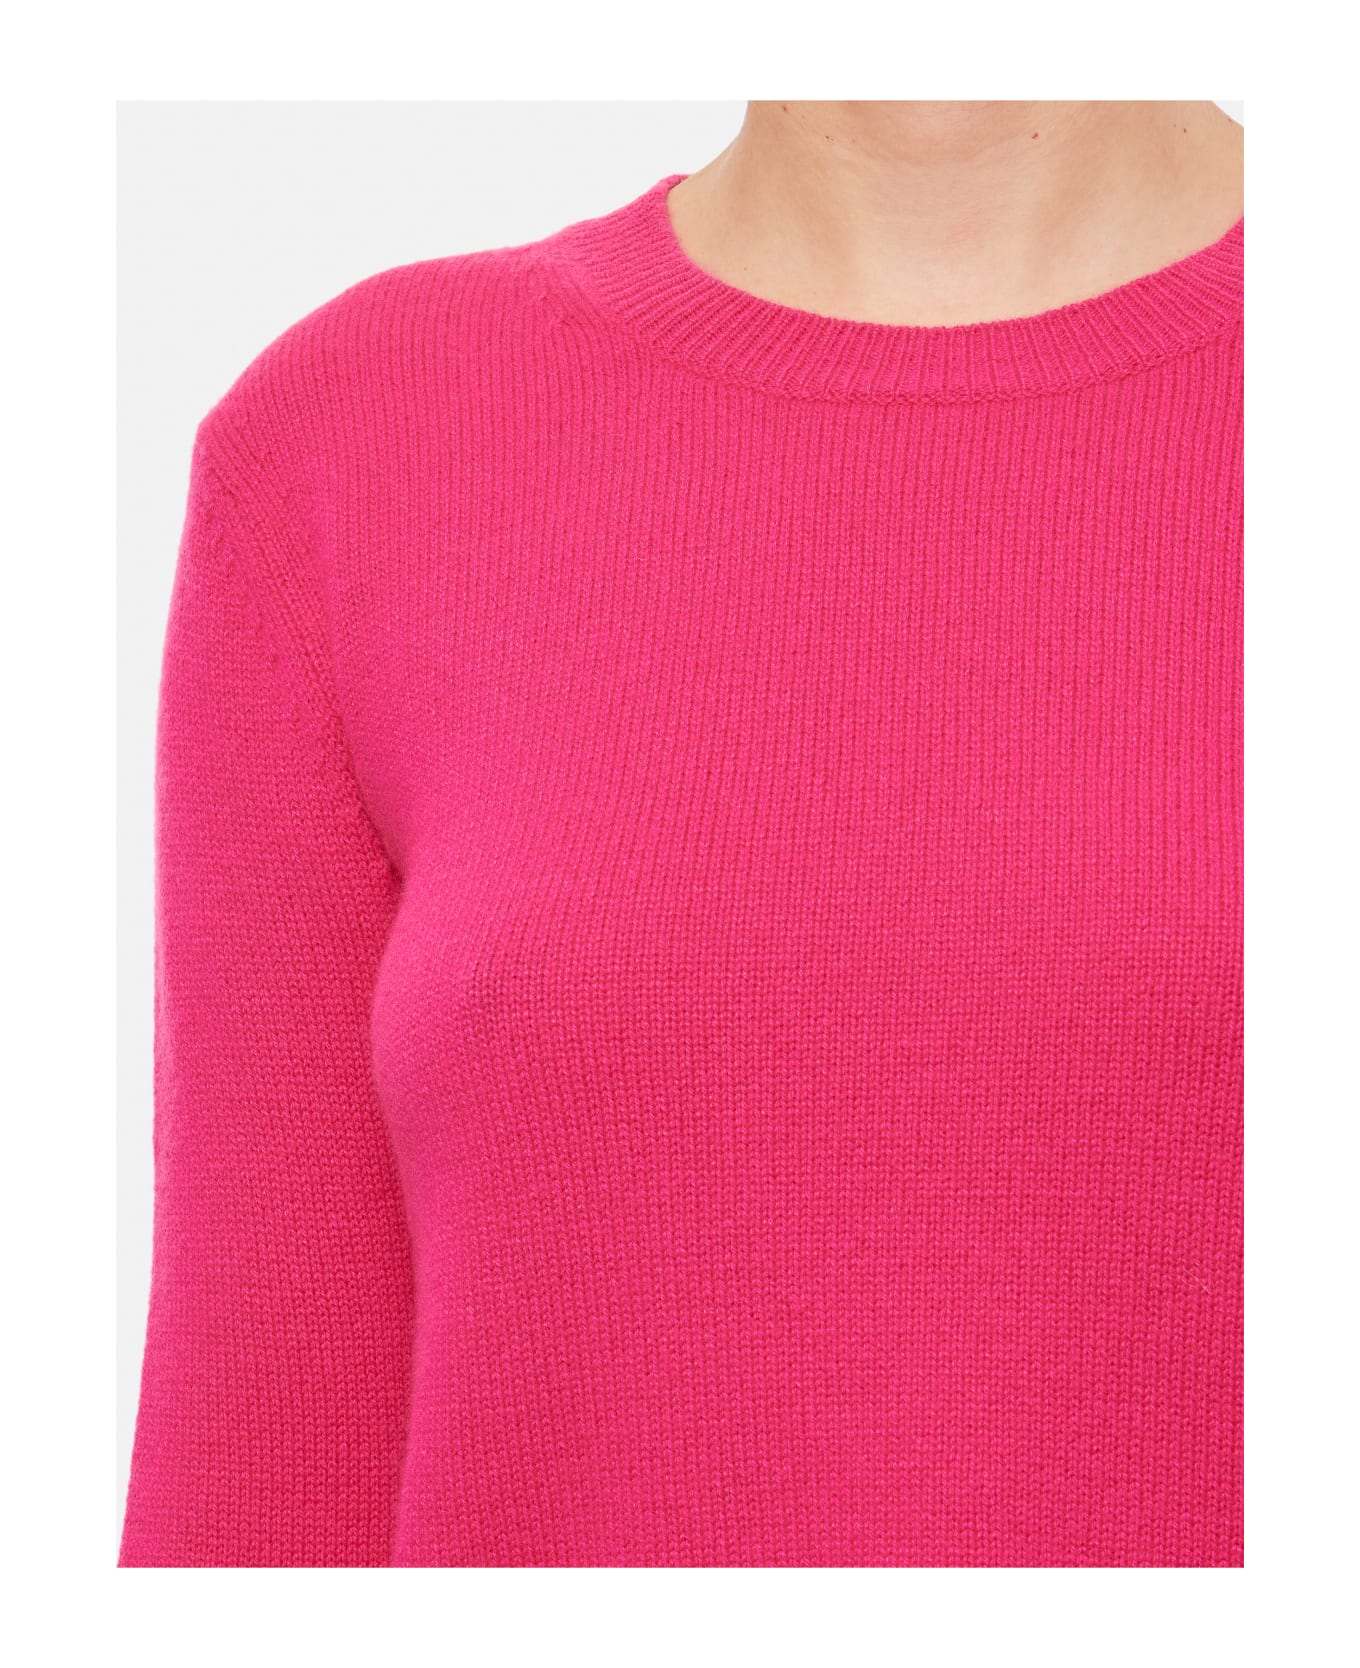 Lisa Yang Mable Cashmere Sweater - Pink